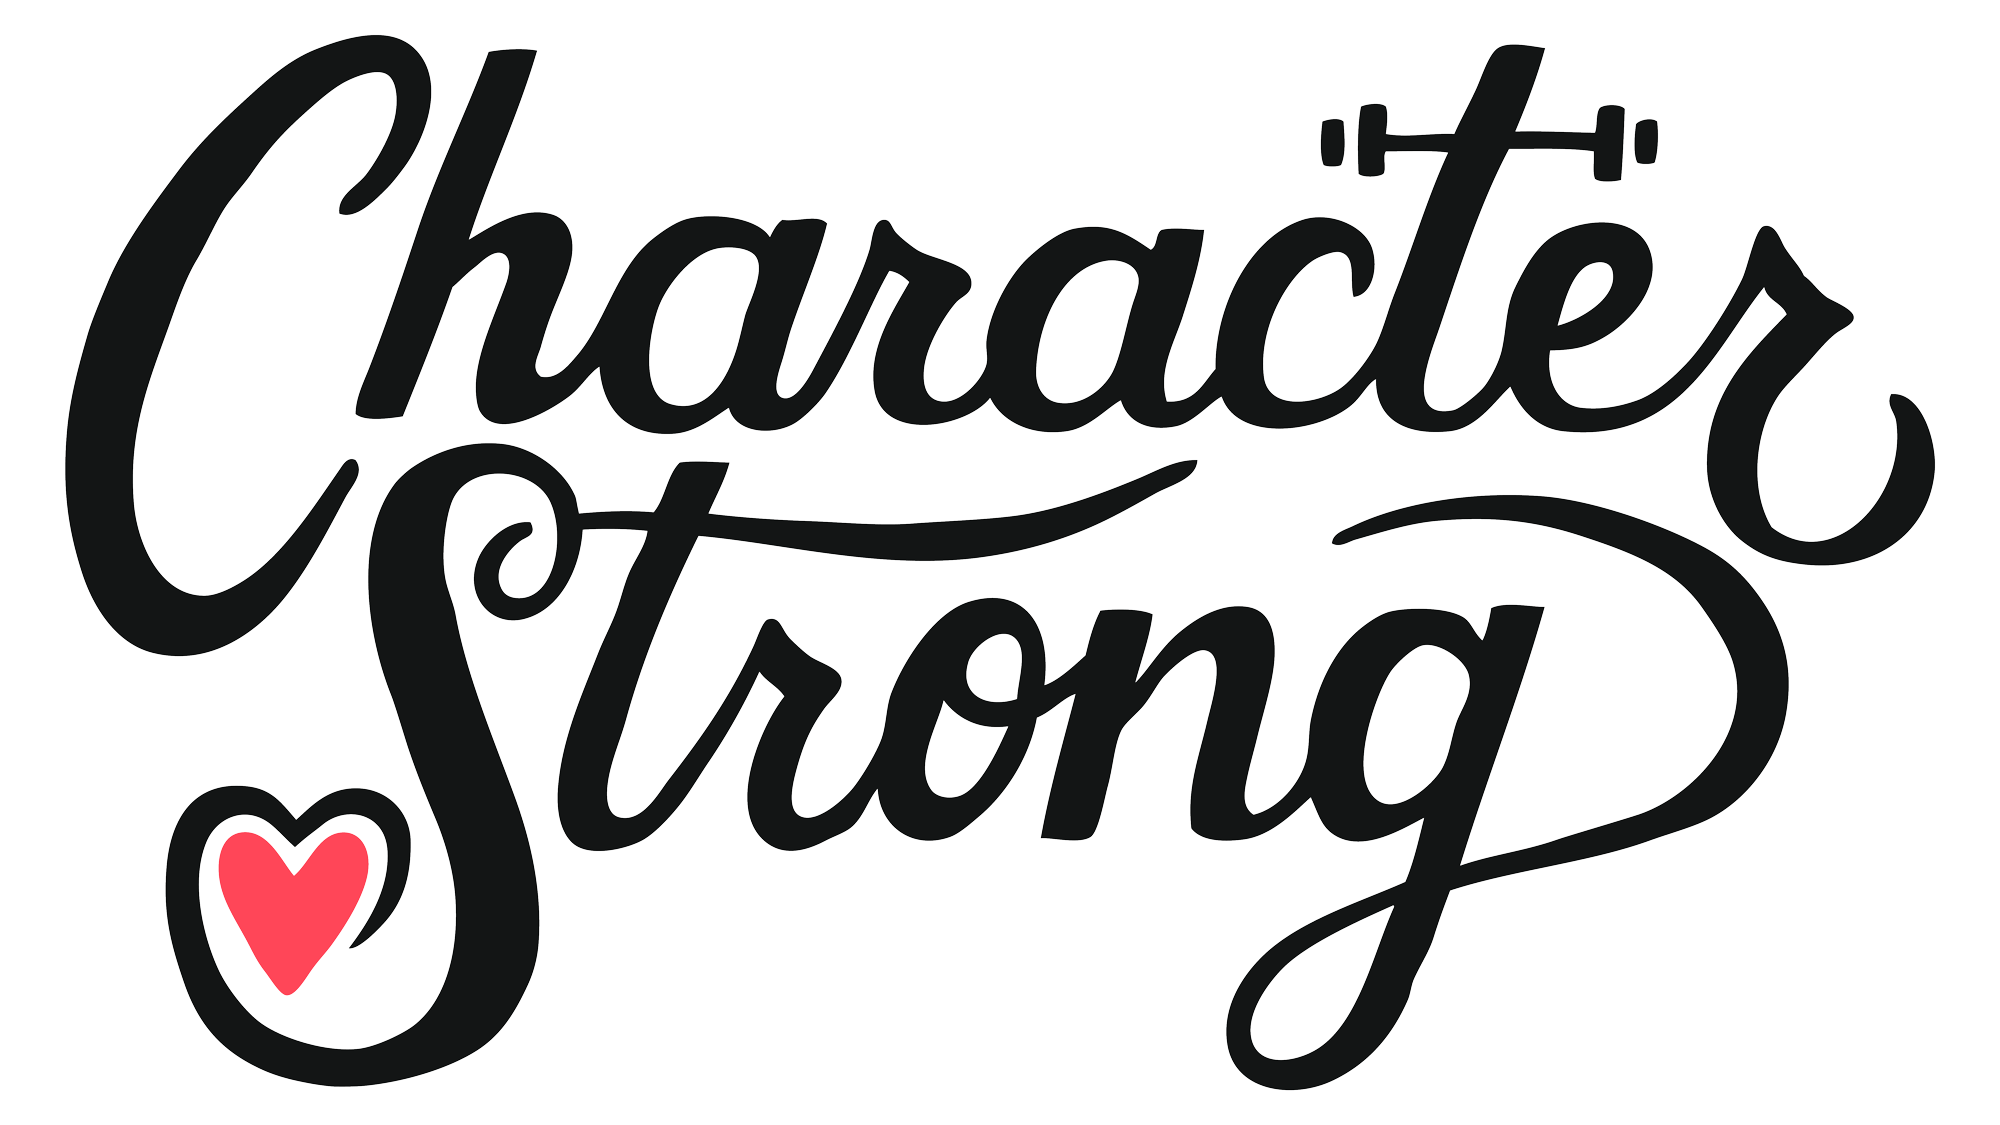 FamilyStrong - CharacterStrong